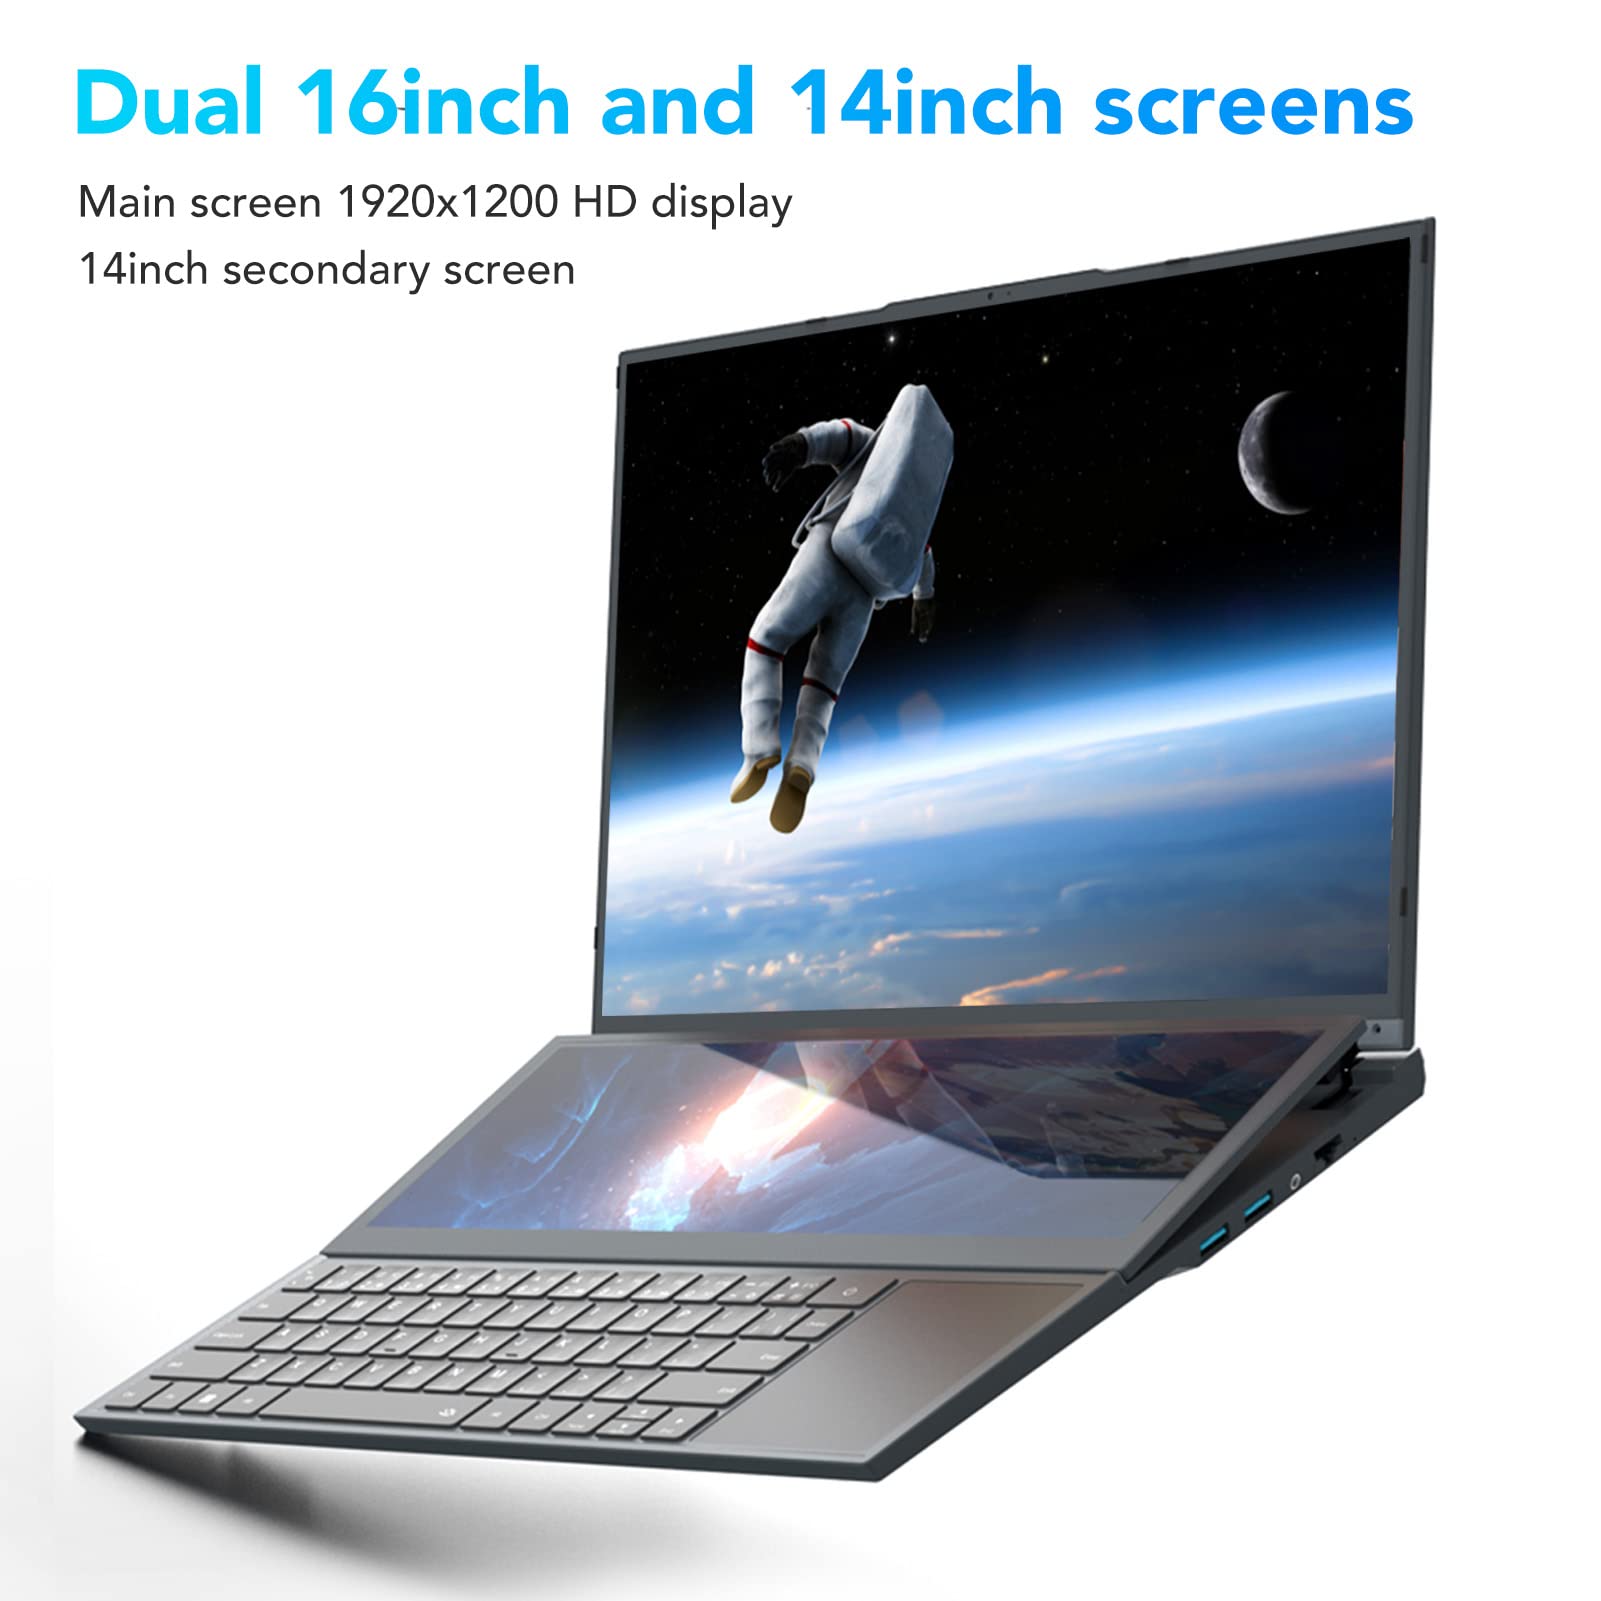 16in+14in Dual Screen Laptop, Gaming Laptop, 14 Inch UHD Touch Display, Core I7 Processor, 8G RAM 512G SSD, Ultra for Core Graphics, Dual Hard Drive, Windows11 (US Plug)